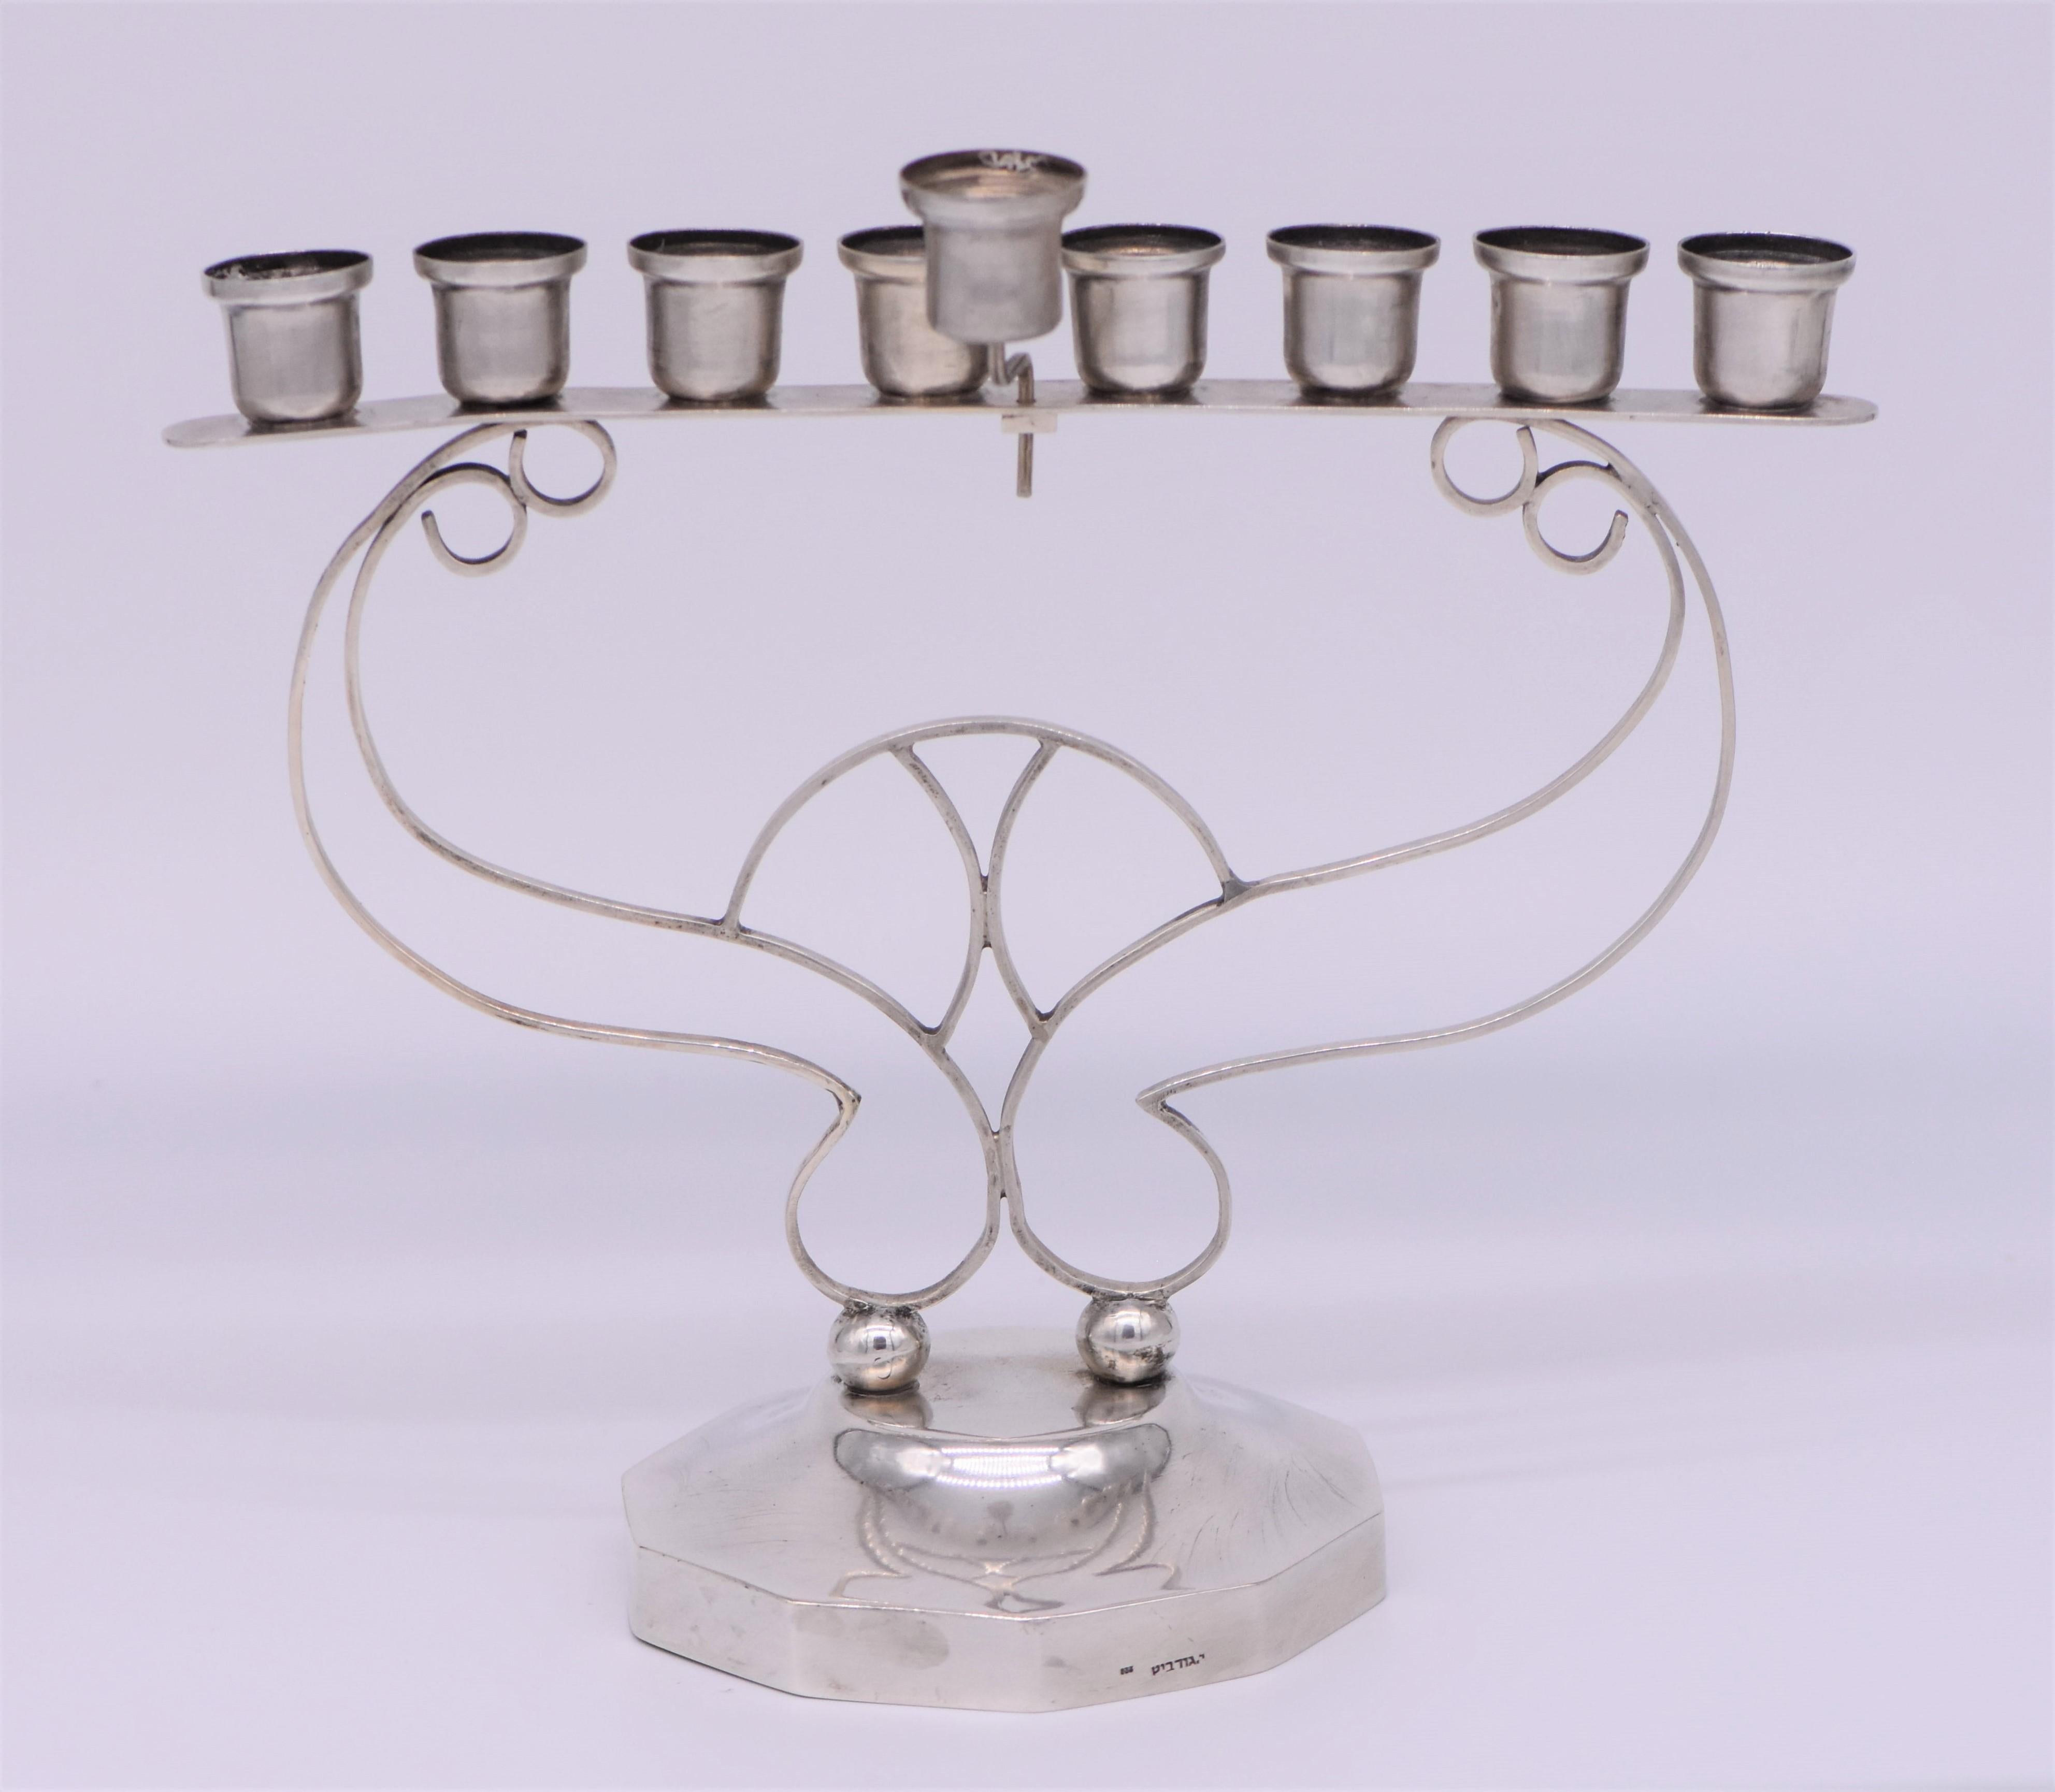 Handmade silver Hanukkah lamp, Israel, circa 1940s.
Beautiful Arts & Crafts Hanukkah lamp by I. Gurevitz. with great hand silver work with solid silver wires in the center, connected to eight candle holders and with the original servant light-